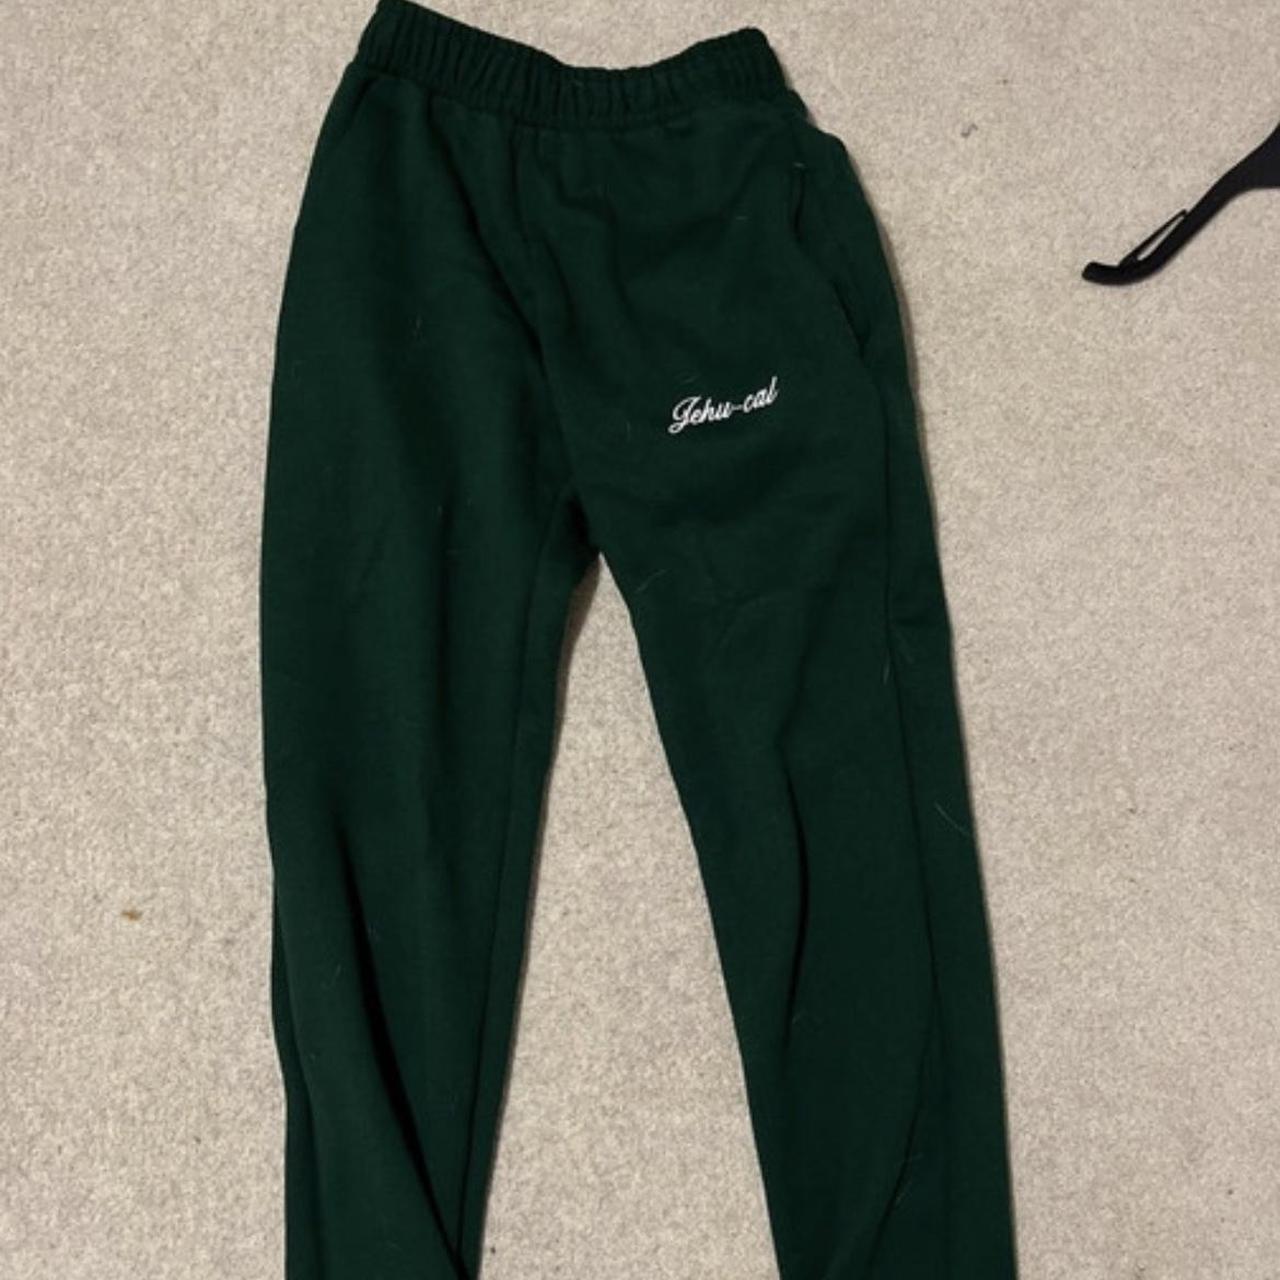 jehucal emerald green joggers size xs great condition - Depop